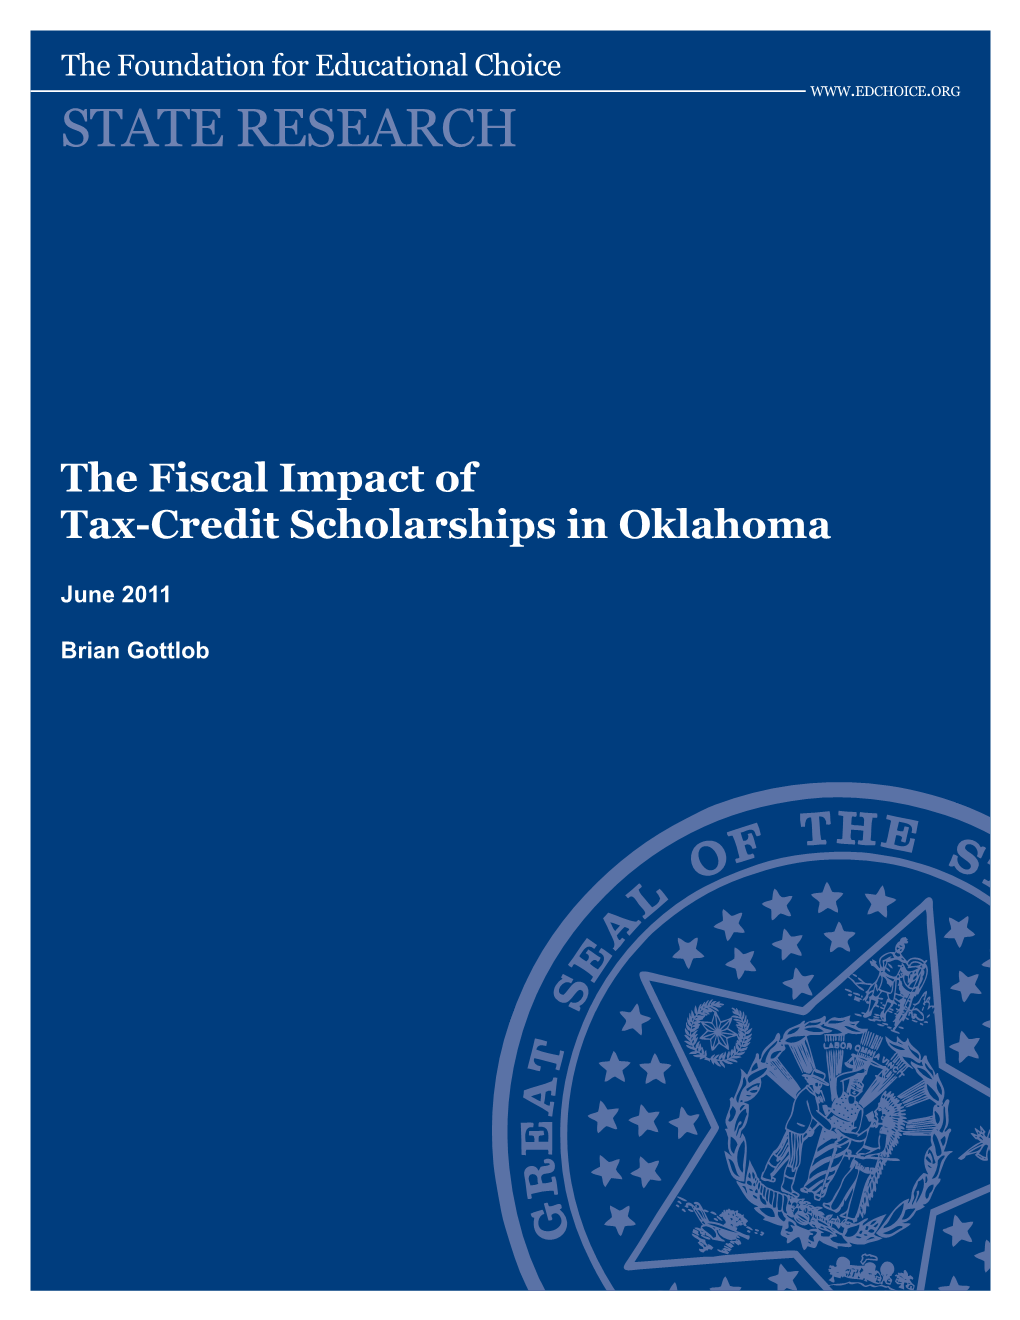 The Fiscal Impact of Tax-Credit Scholarships in Oklahoma. State